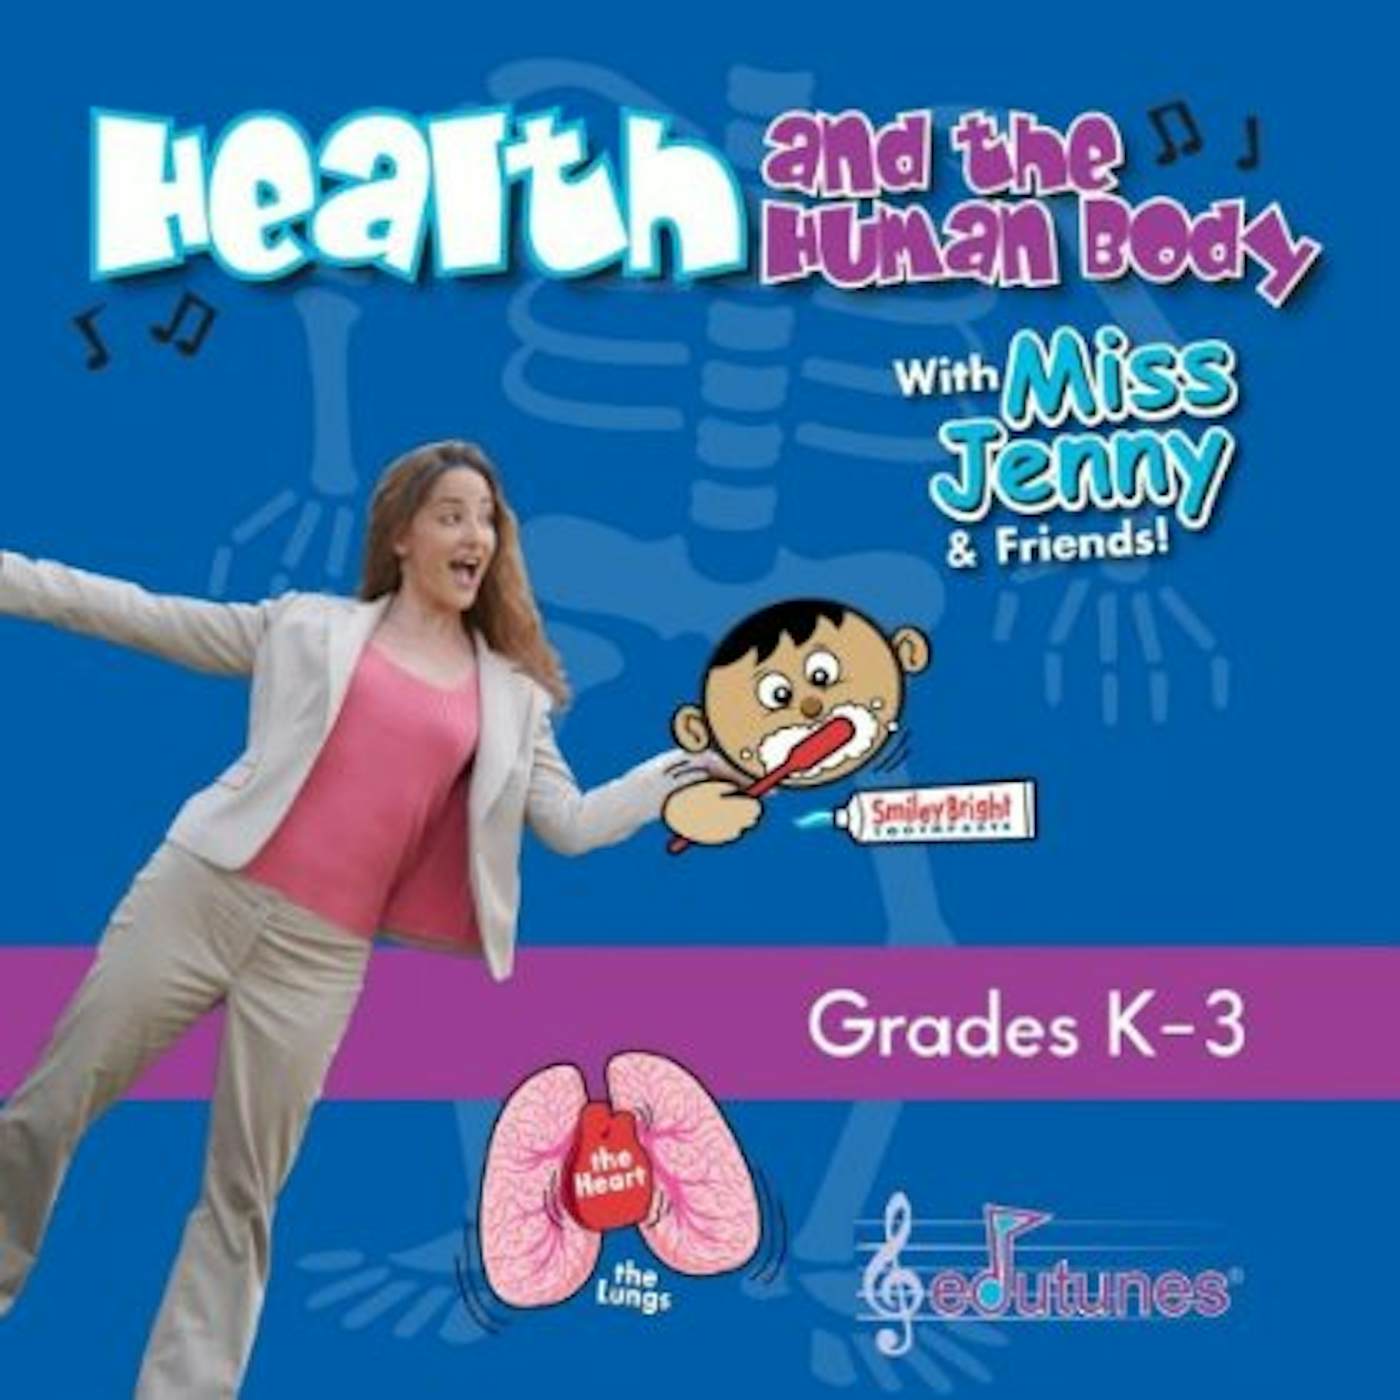 HEALTH & THE HUMAN BODY WITH MISS JENNY & FRIENDS CD